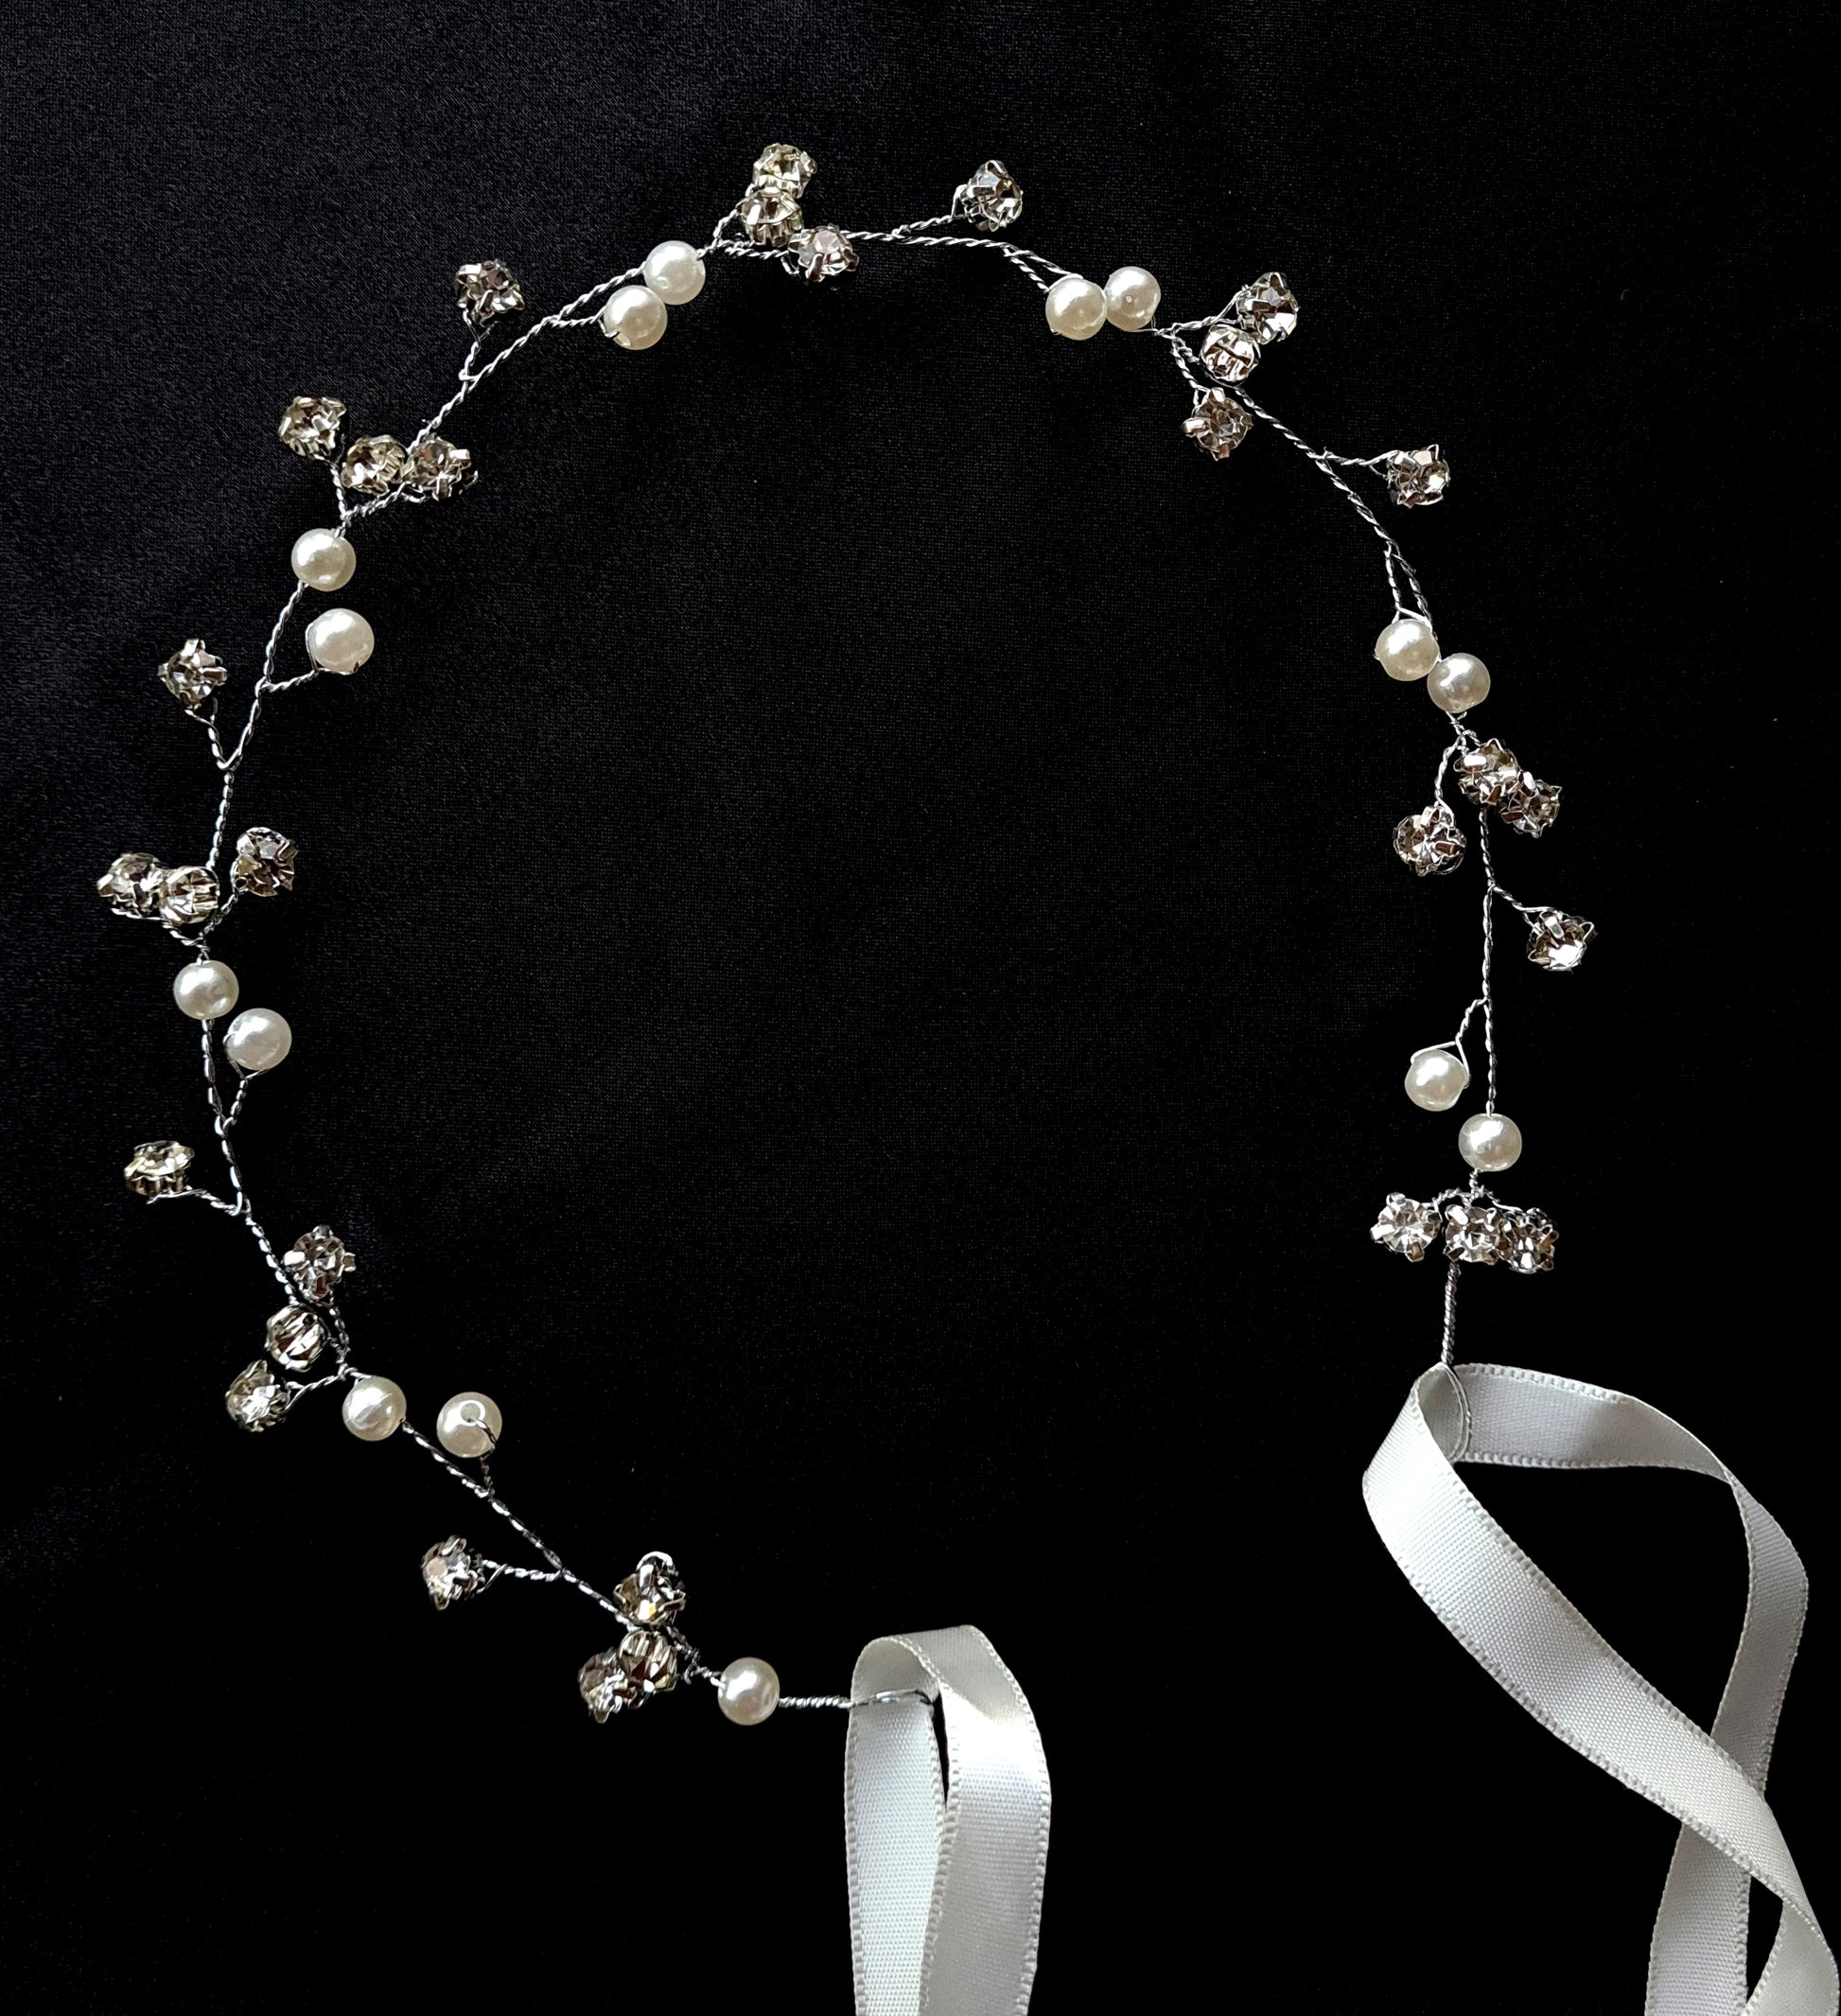 A wreath of pearls and crystals with a white ribbon. The wreath is 33 cm in diameter. It has a delicate design with pearls, crystals, and a white ribbon. The pearls are white and the crystals are clear. The background is black.